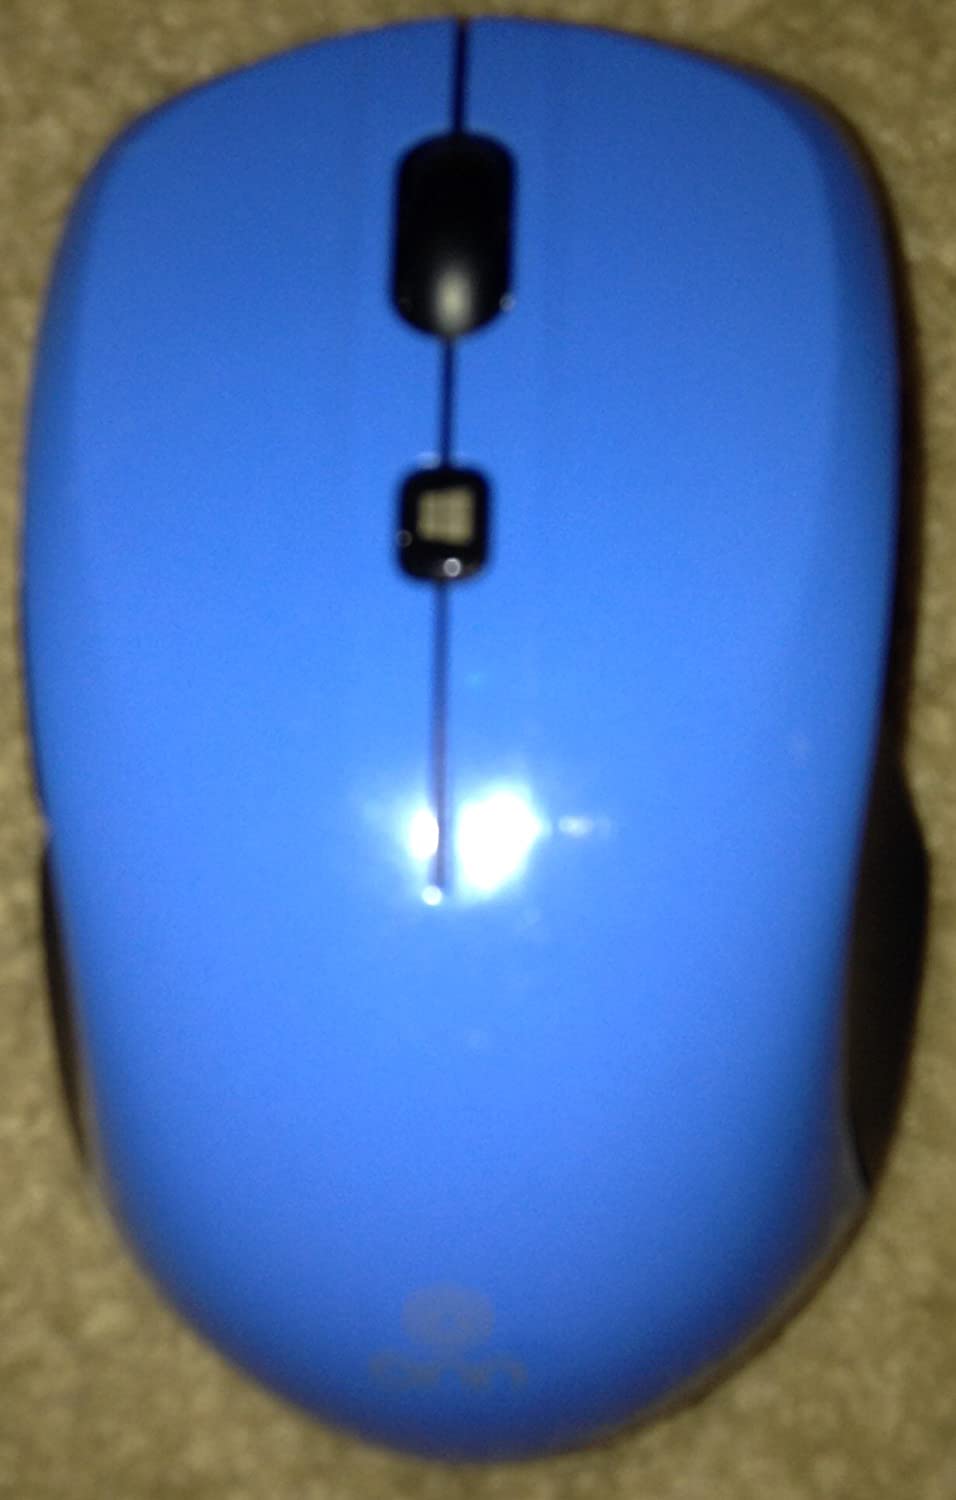 onn optical mouse not working